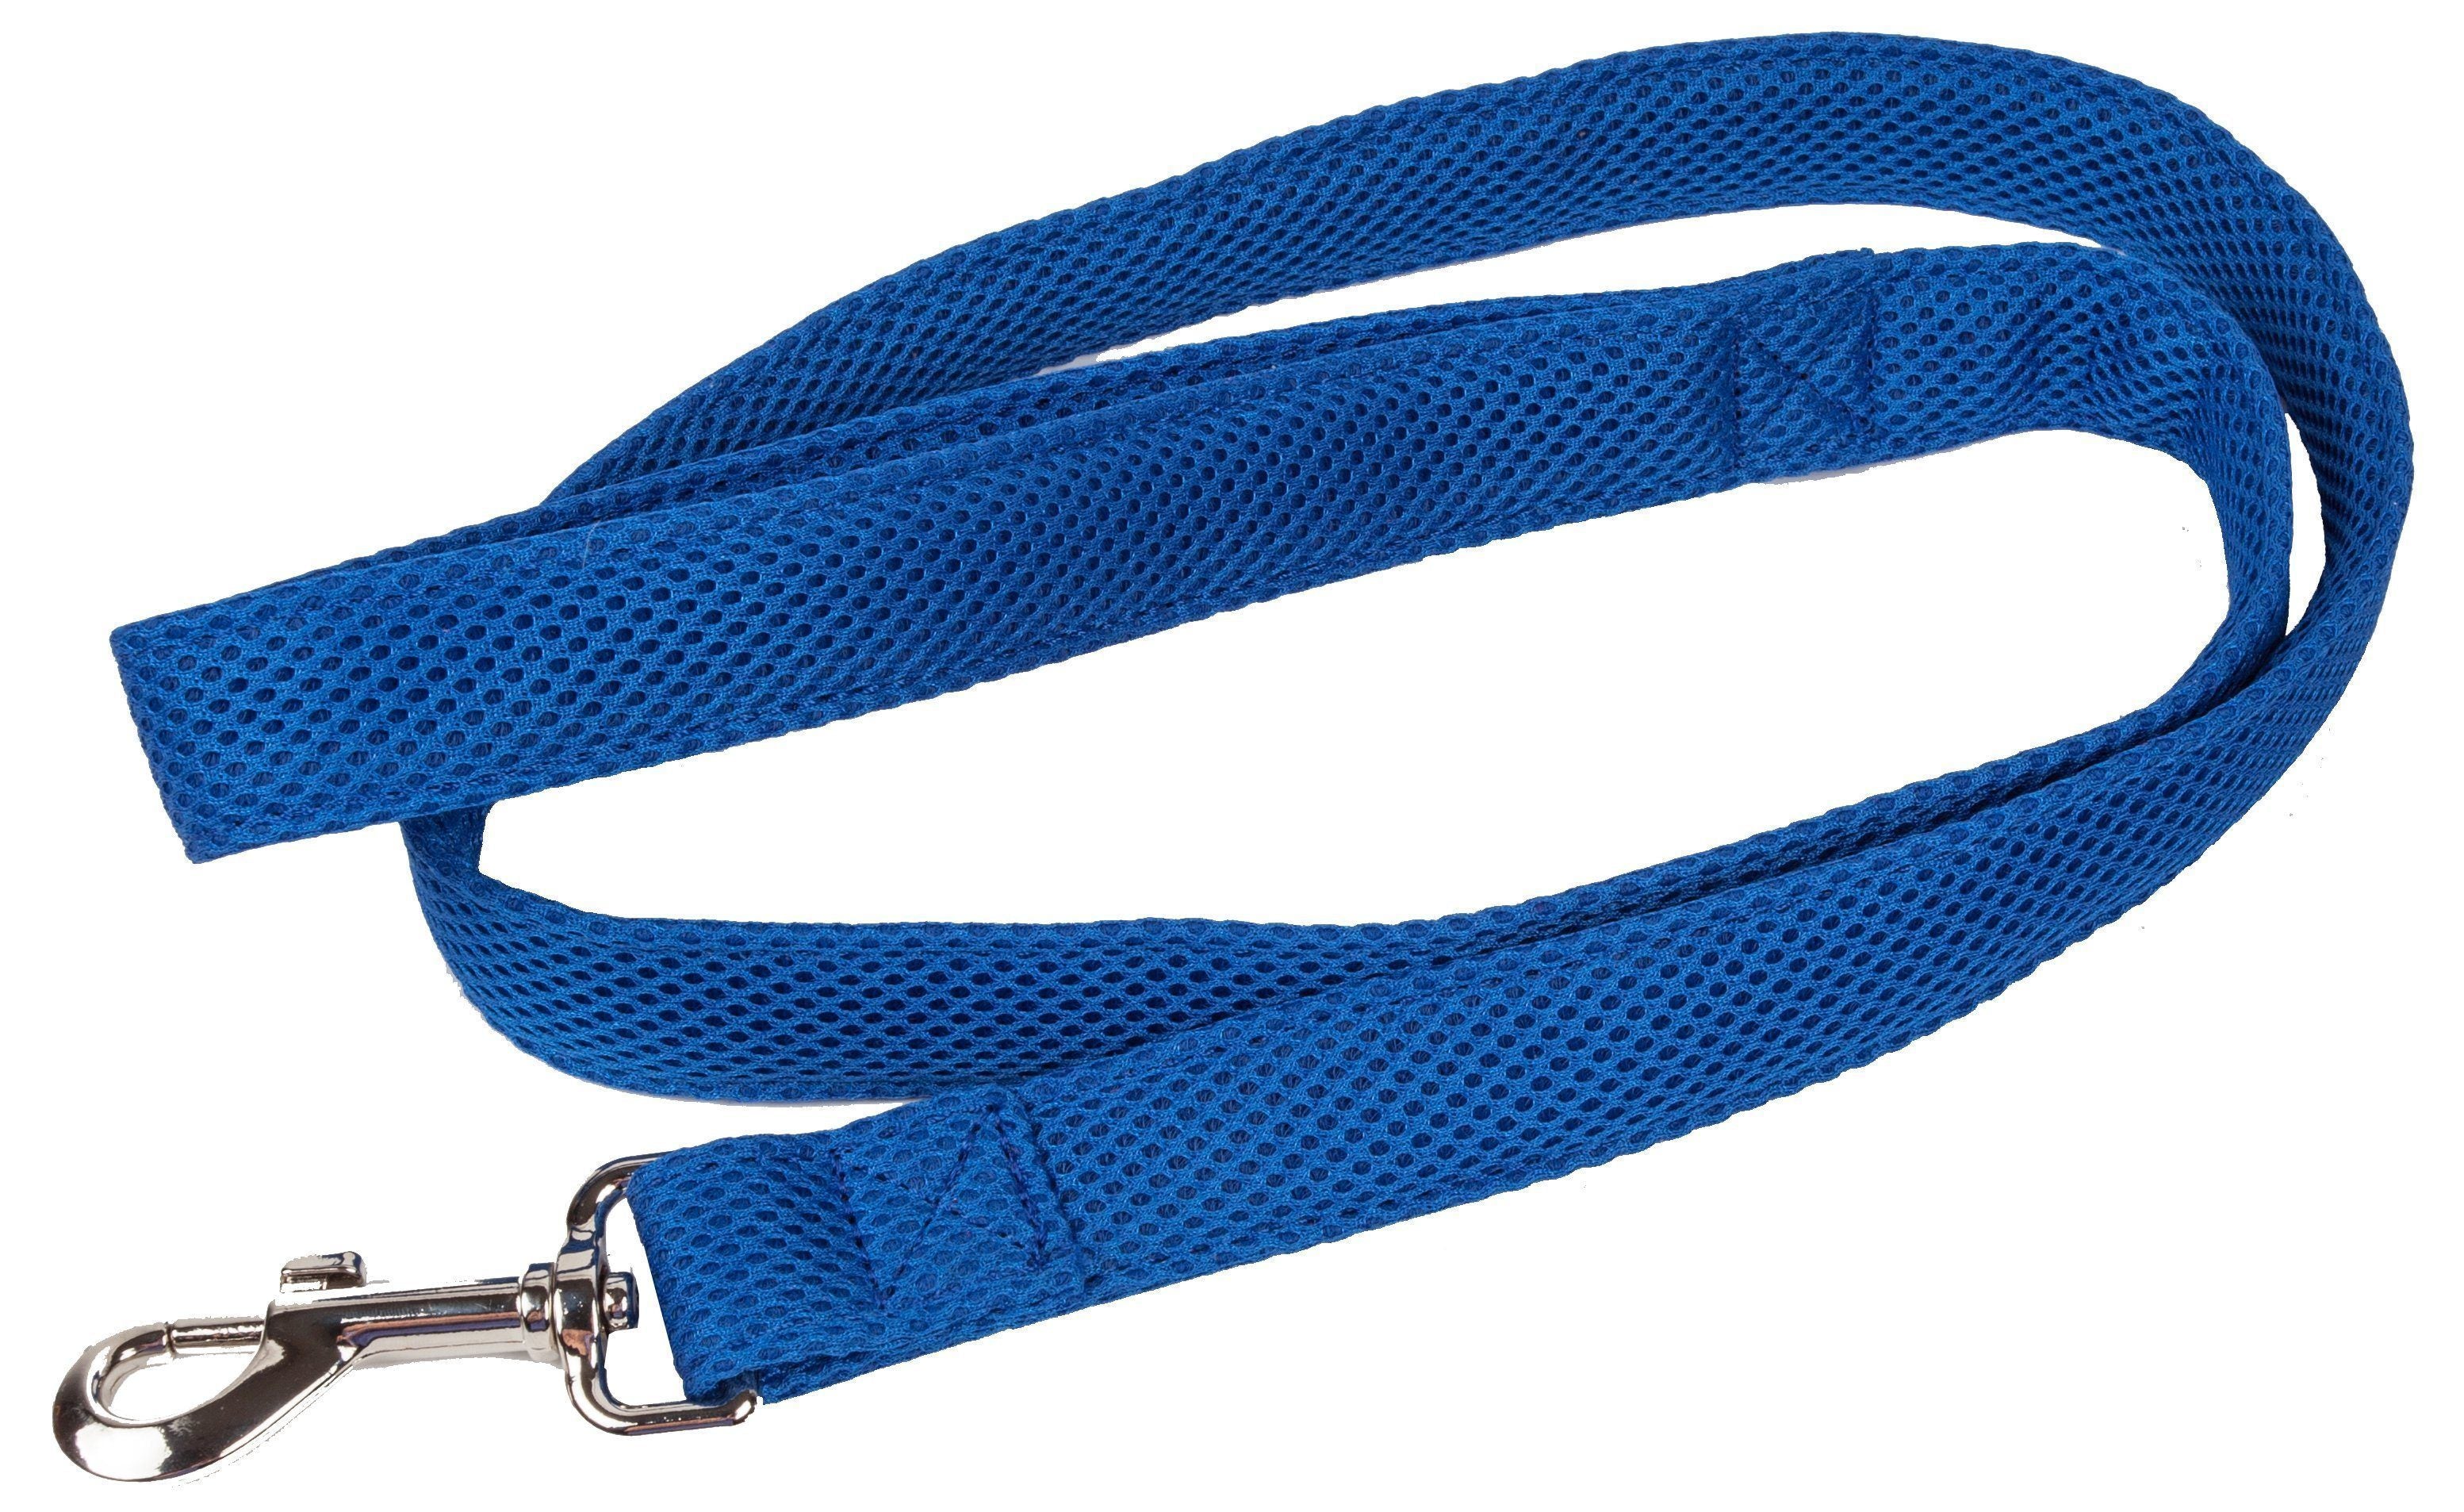 Pet Life ®  'Aero Mesh' Breathable and Adjustable Dual Sided Thick Mesh Dog Leash Blue 